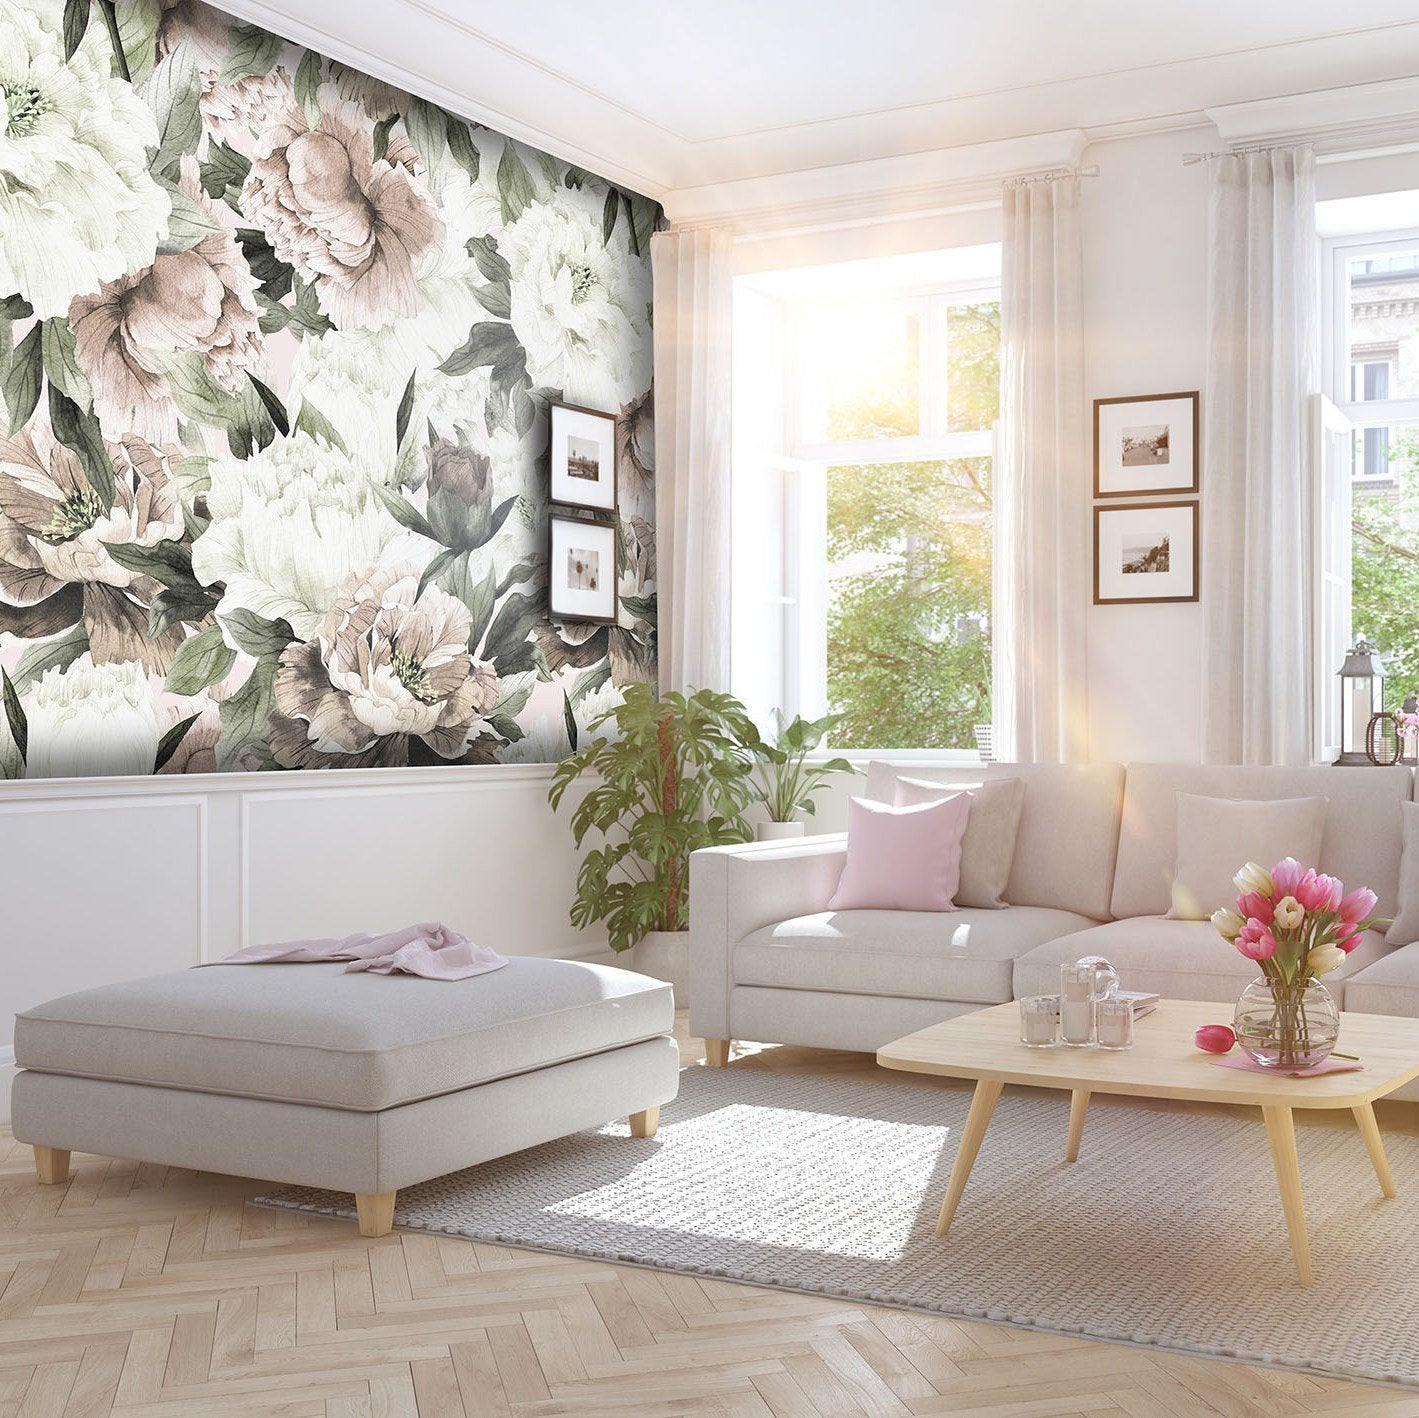 Large peonies in white and pink blush colors with green leaves mural wallpaper for living room